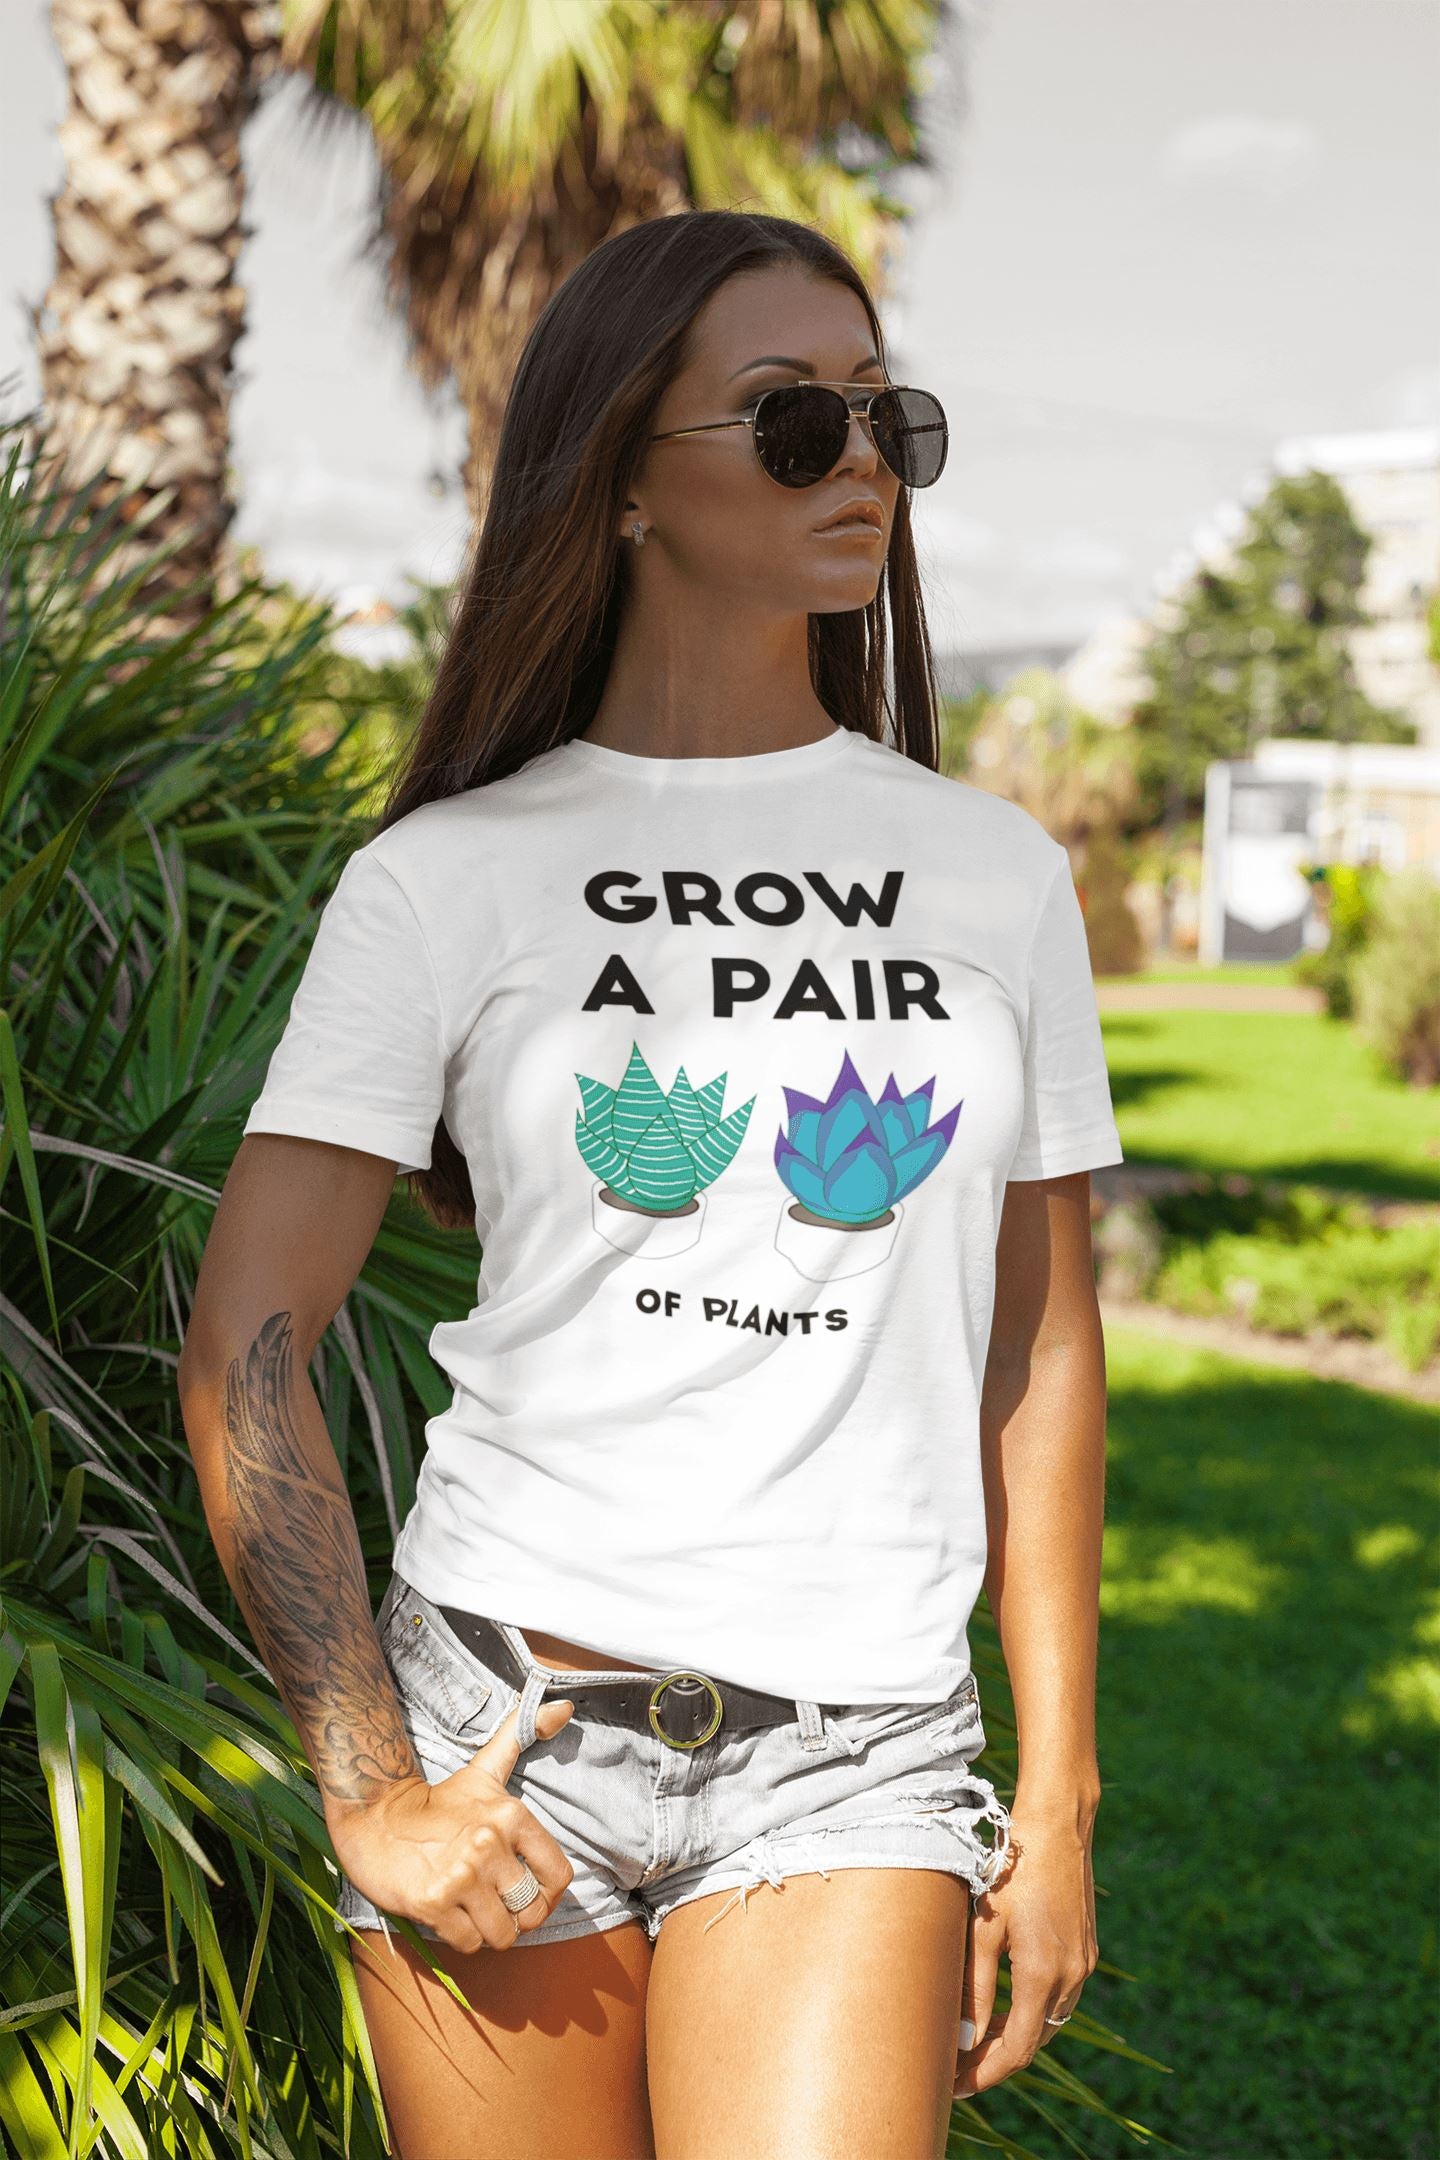 Grow A Pair of Plants Funny White T Shirt for Men and Women | Beachwear - Catch My Drift India  activewear, beachwear, clothing, funny, gym, made in india, shirt, t shirt, trending, tshirt, w